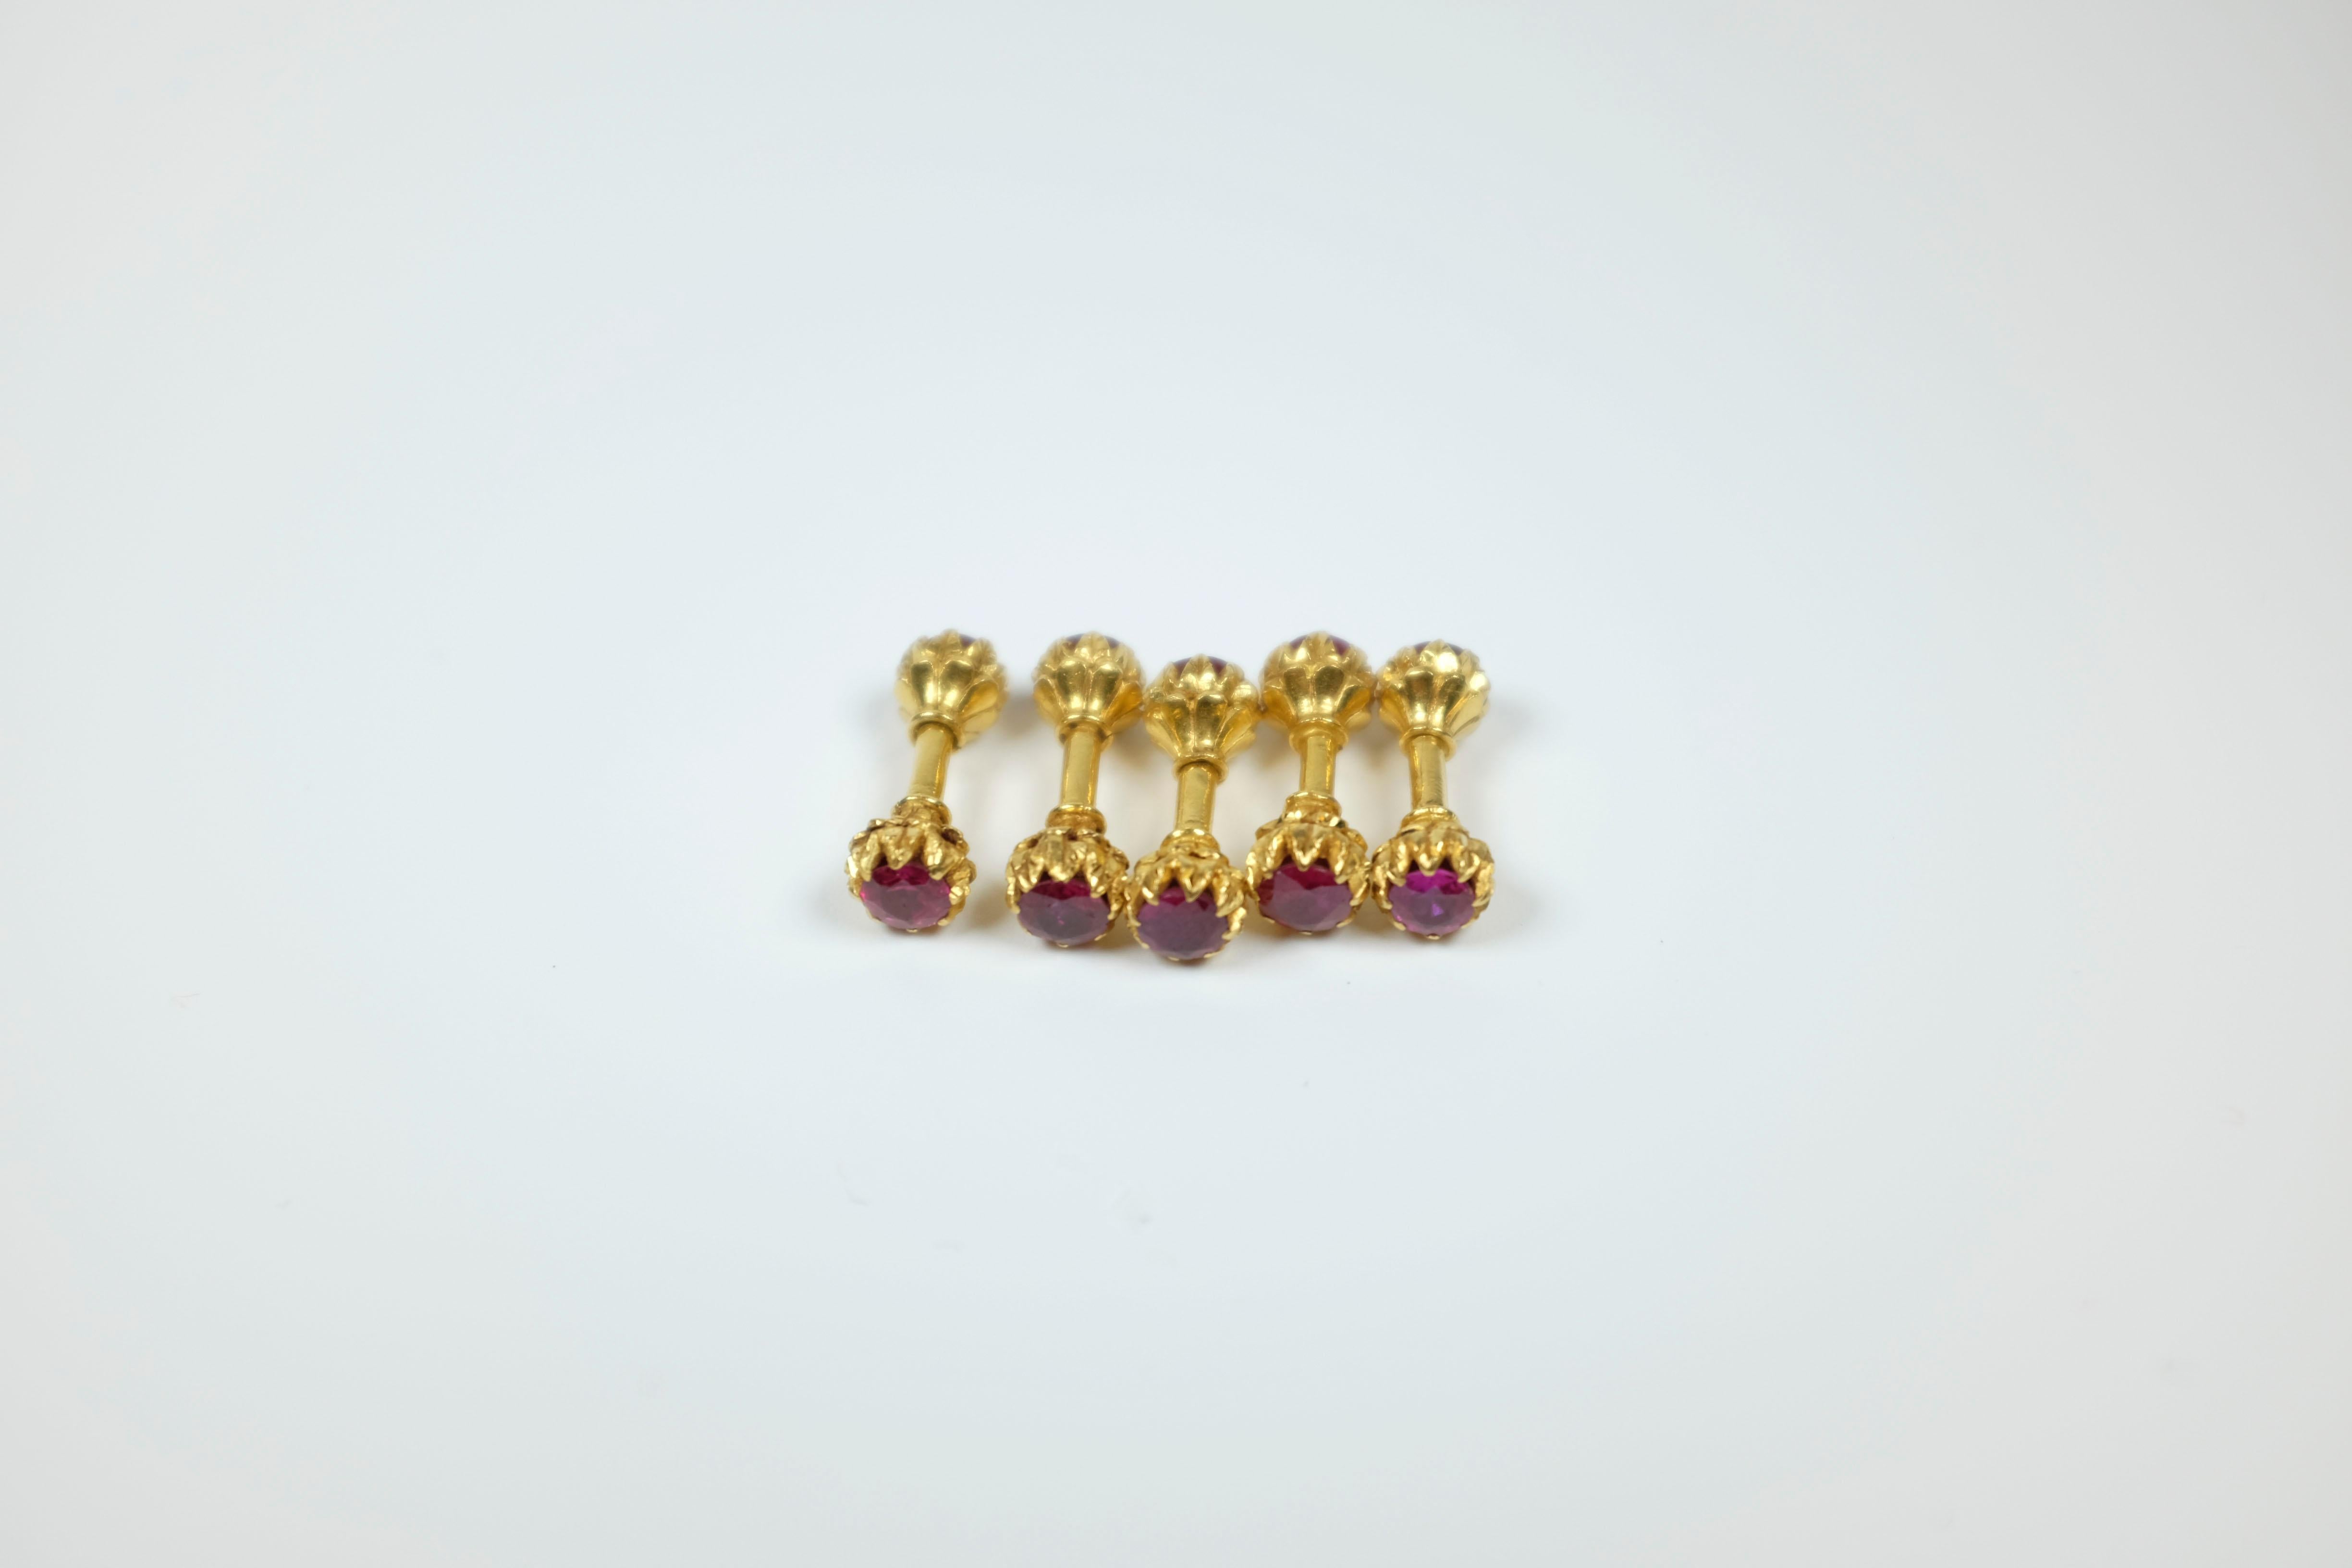 Decorative jewels set. 'Buttons'. Rare. Collectors item. There are five. Each one carries two unheated Burma rubies, one on each end, approximately 1 carat each. Estimated 10 carats total weight. Each 'button' screws apart/together. Very good,